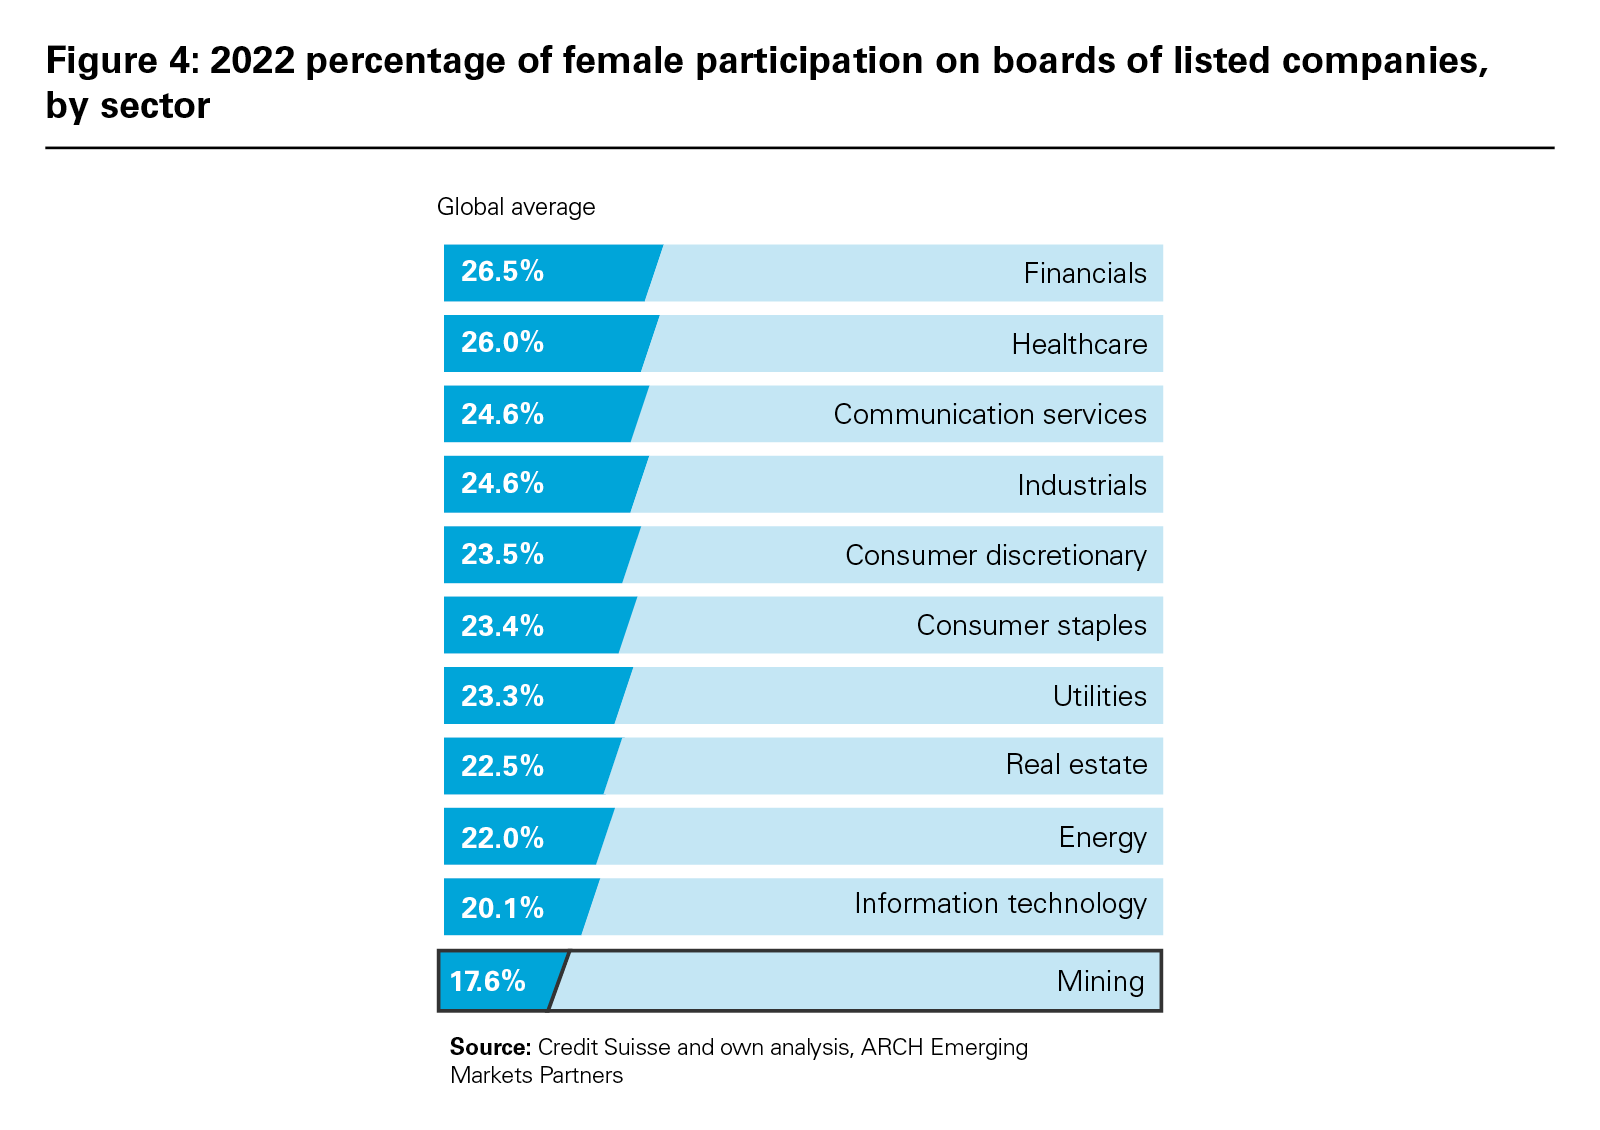 Figure 4: 2022 percentage of female participation on boards of listed companies, by sector